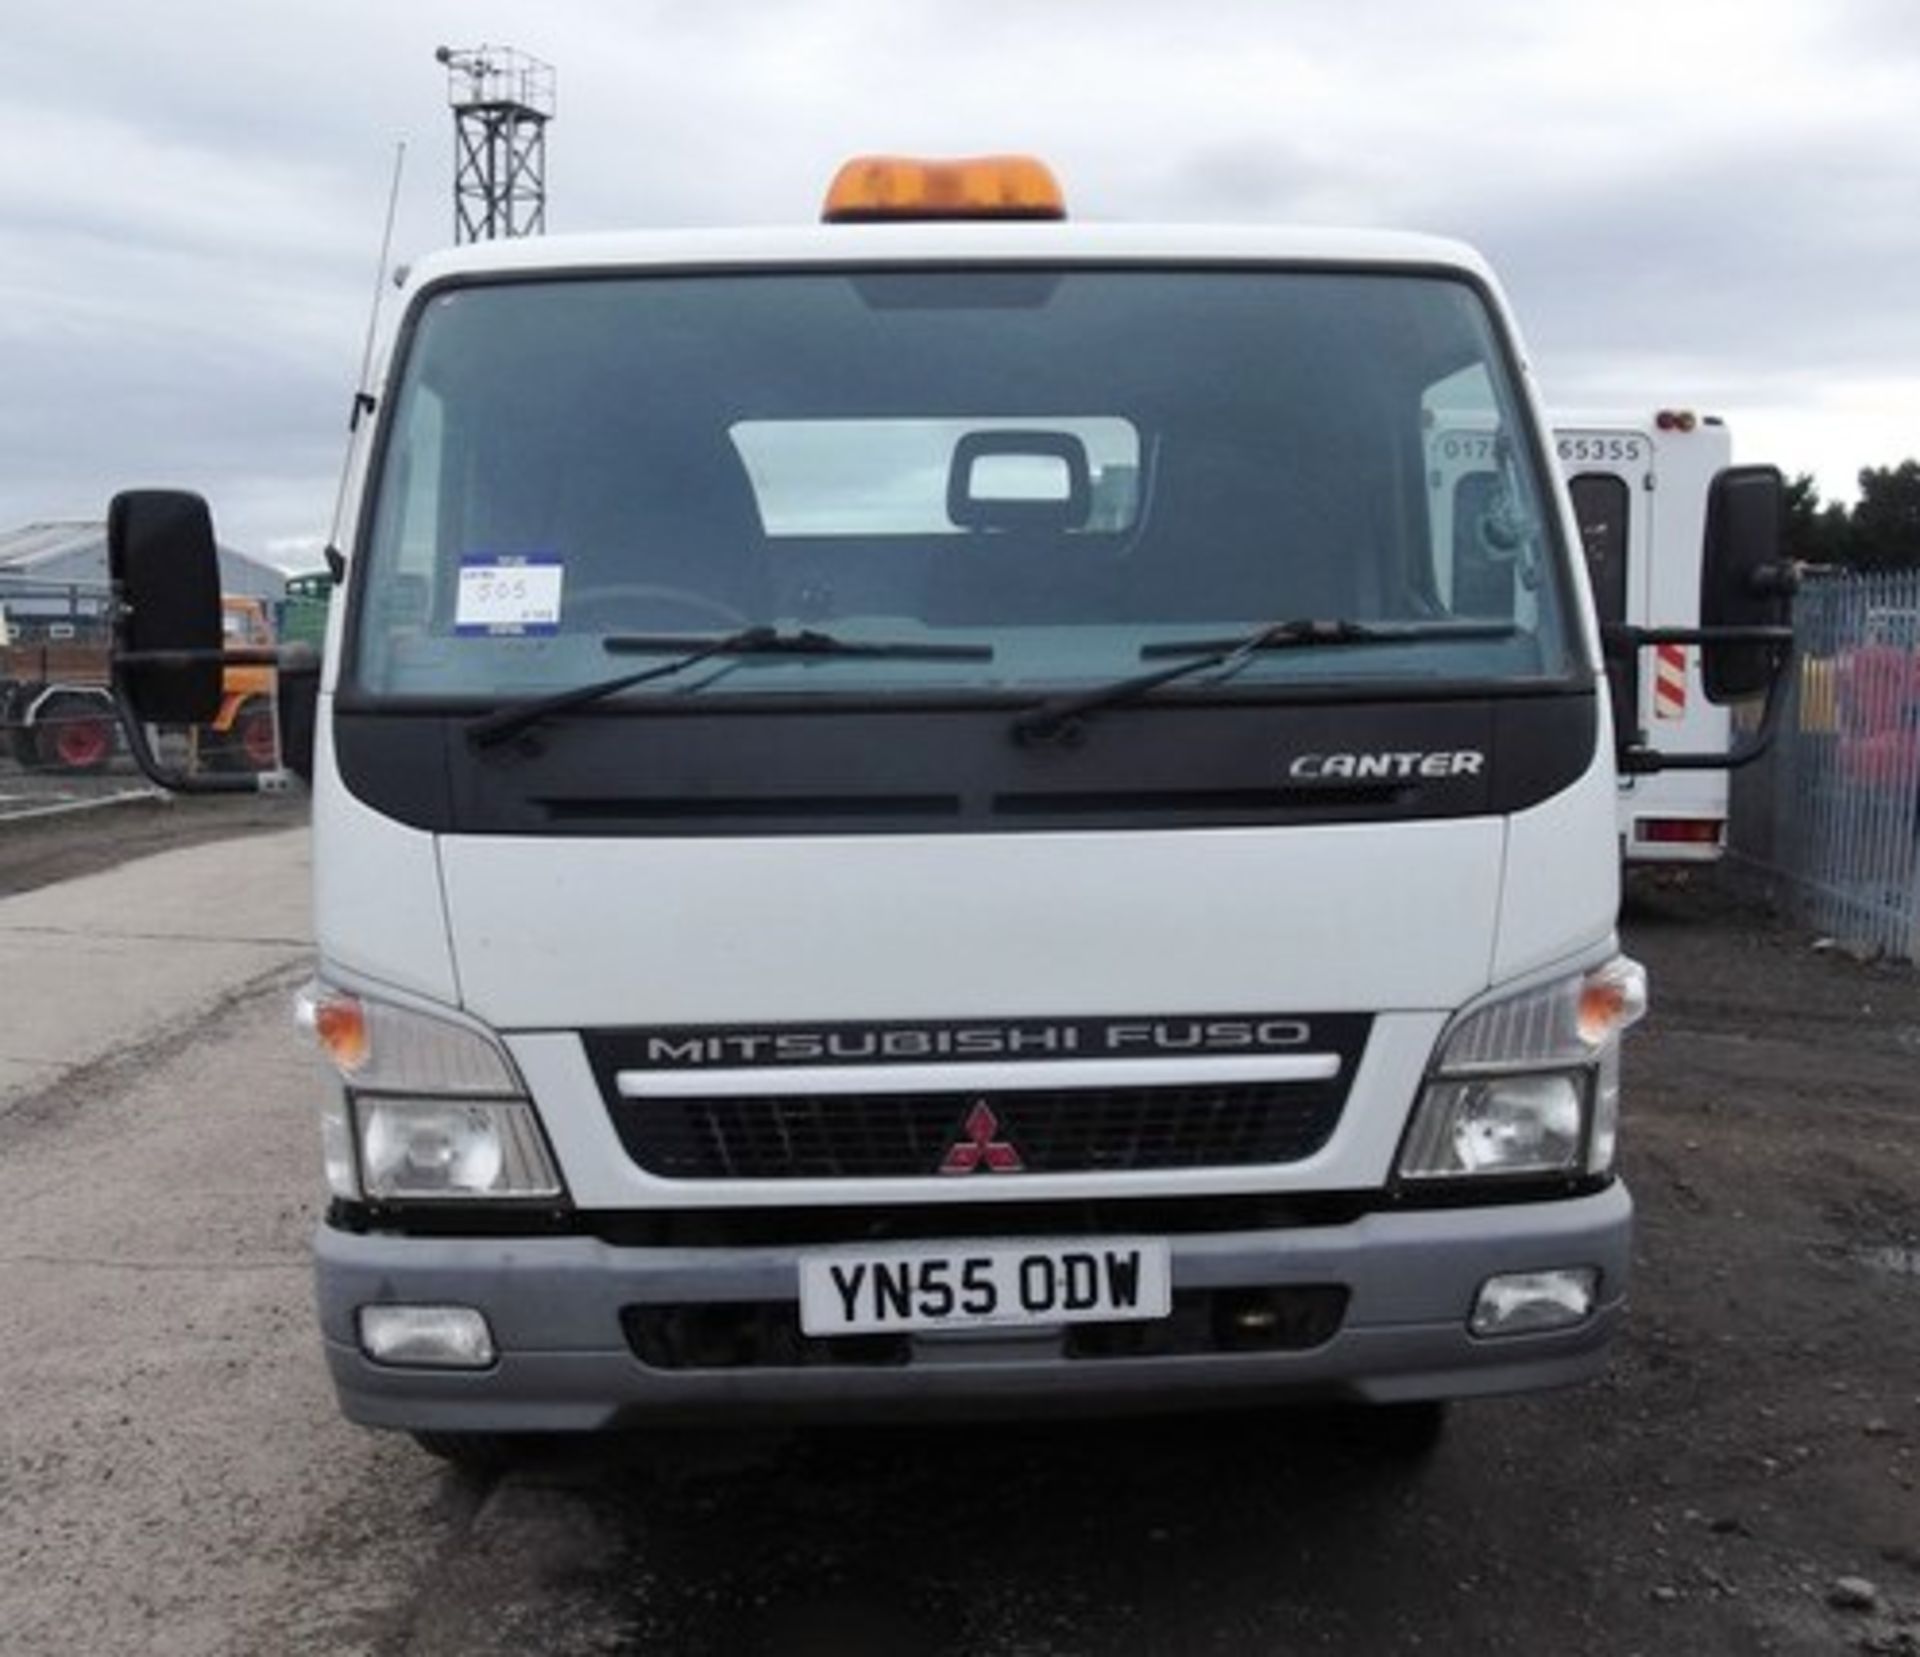 MITSUBISHI CANTER 75 7C14 - 3908cc
Body: 2 Dr Truck
Color: White
First Reg: 01/09/2005
Doors: 2
MOT: - Image 11 of 16